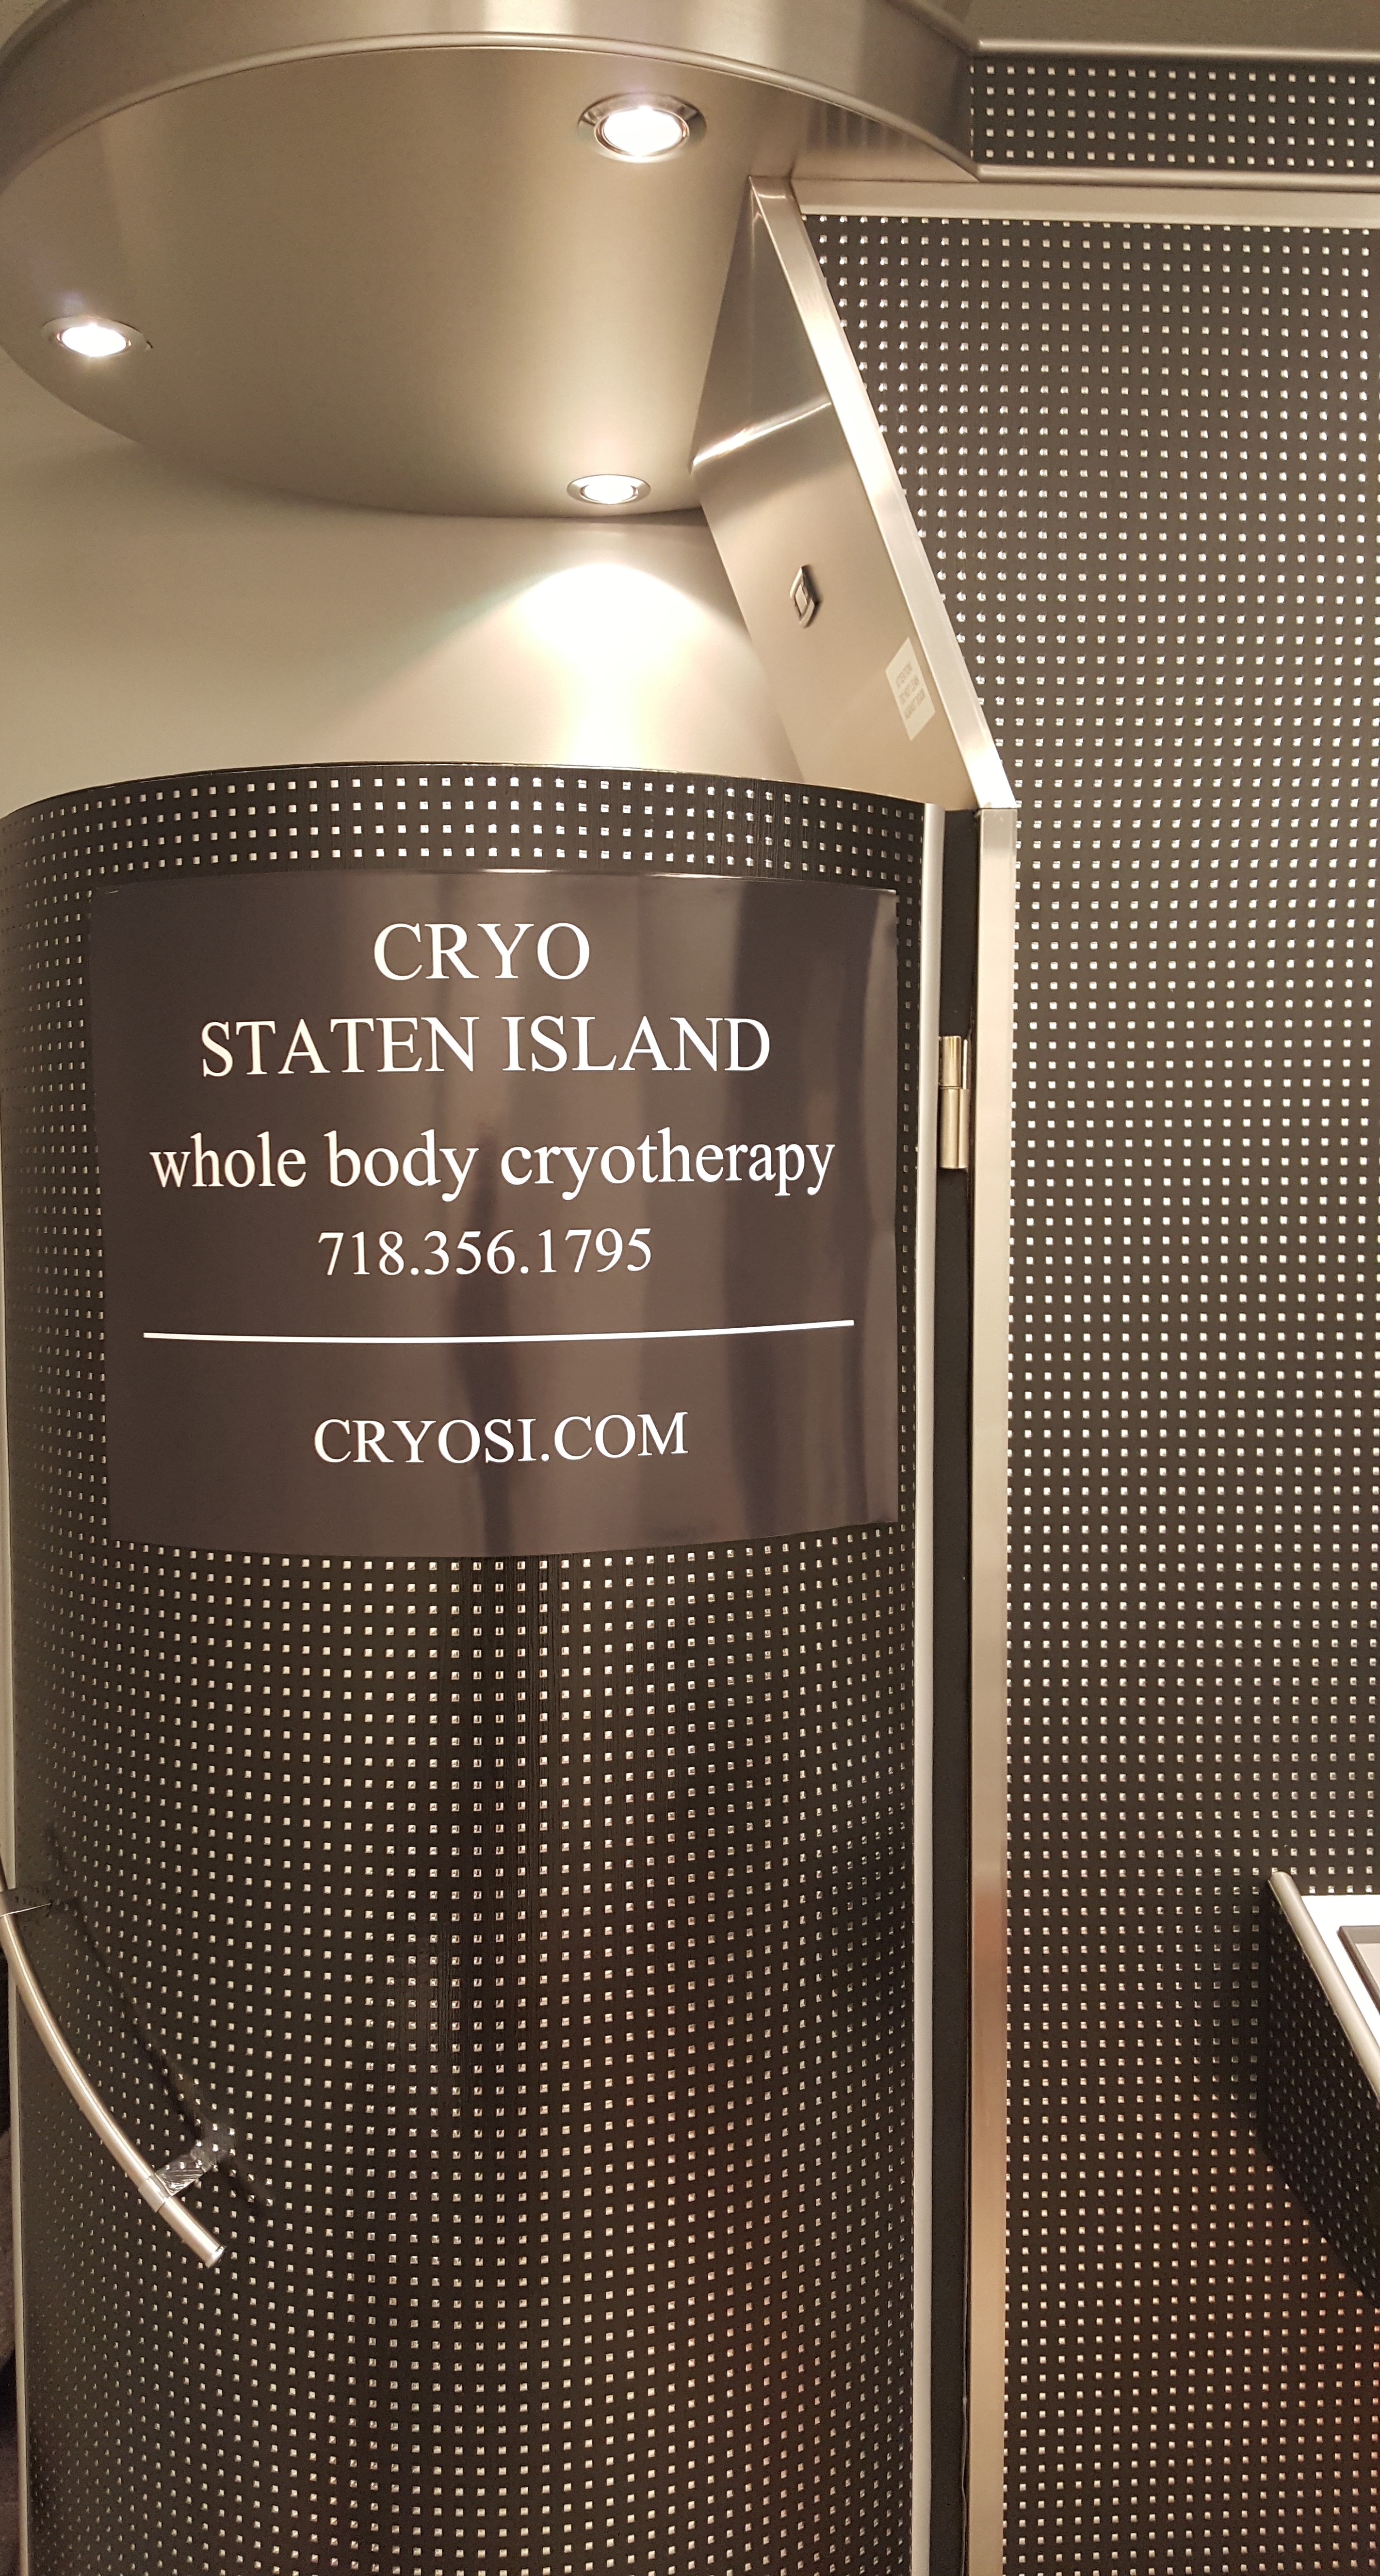 Cryo at Intoxx Fitness gym